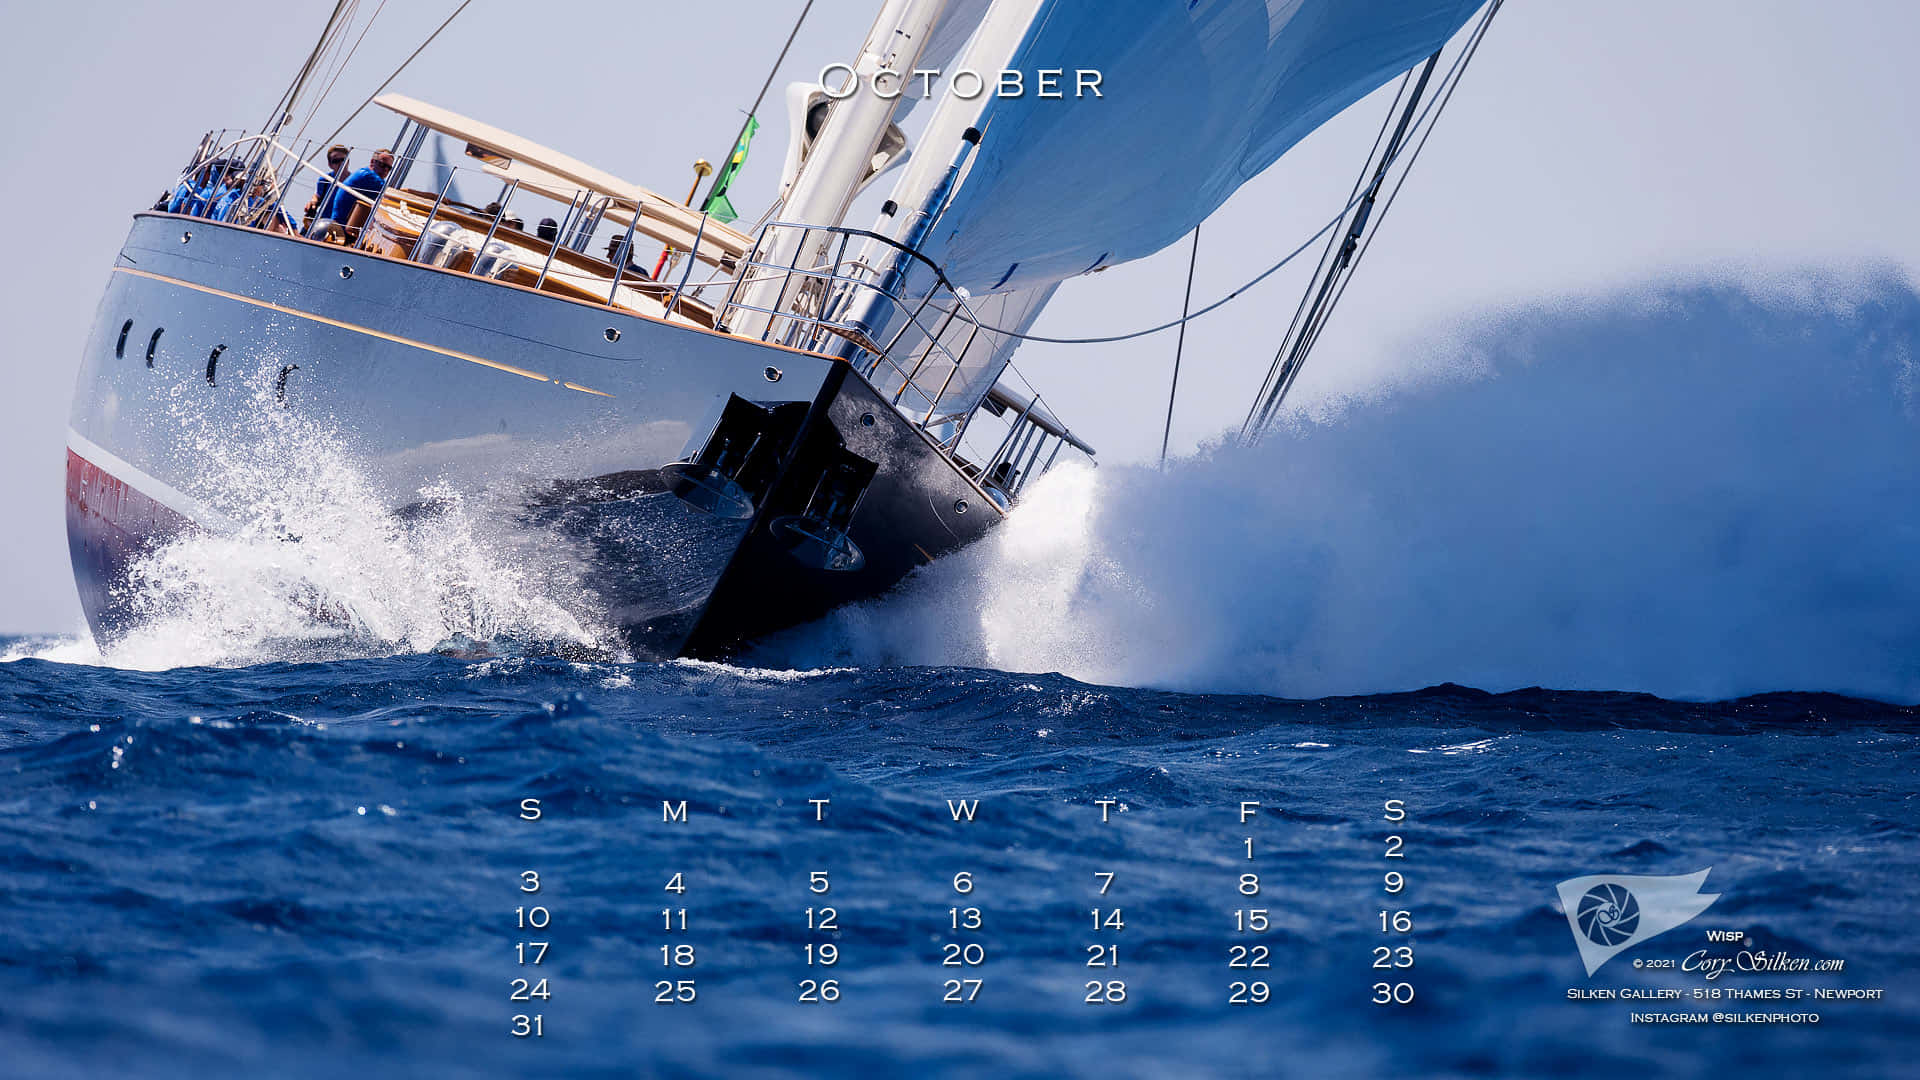 Get organised and ready for upcoming month of October this year with October 2021 calendar Wallpaper